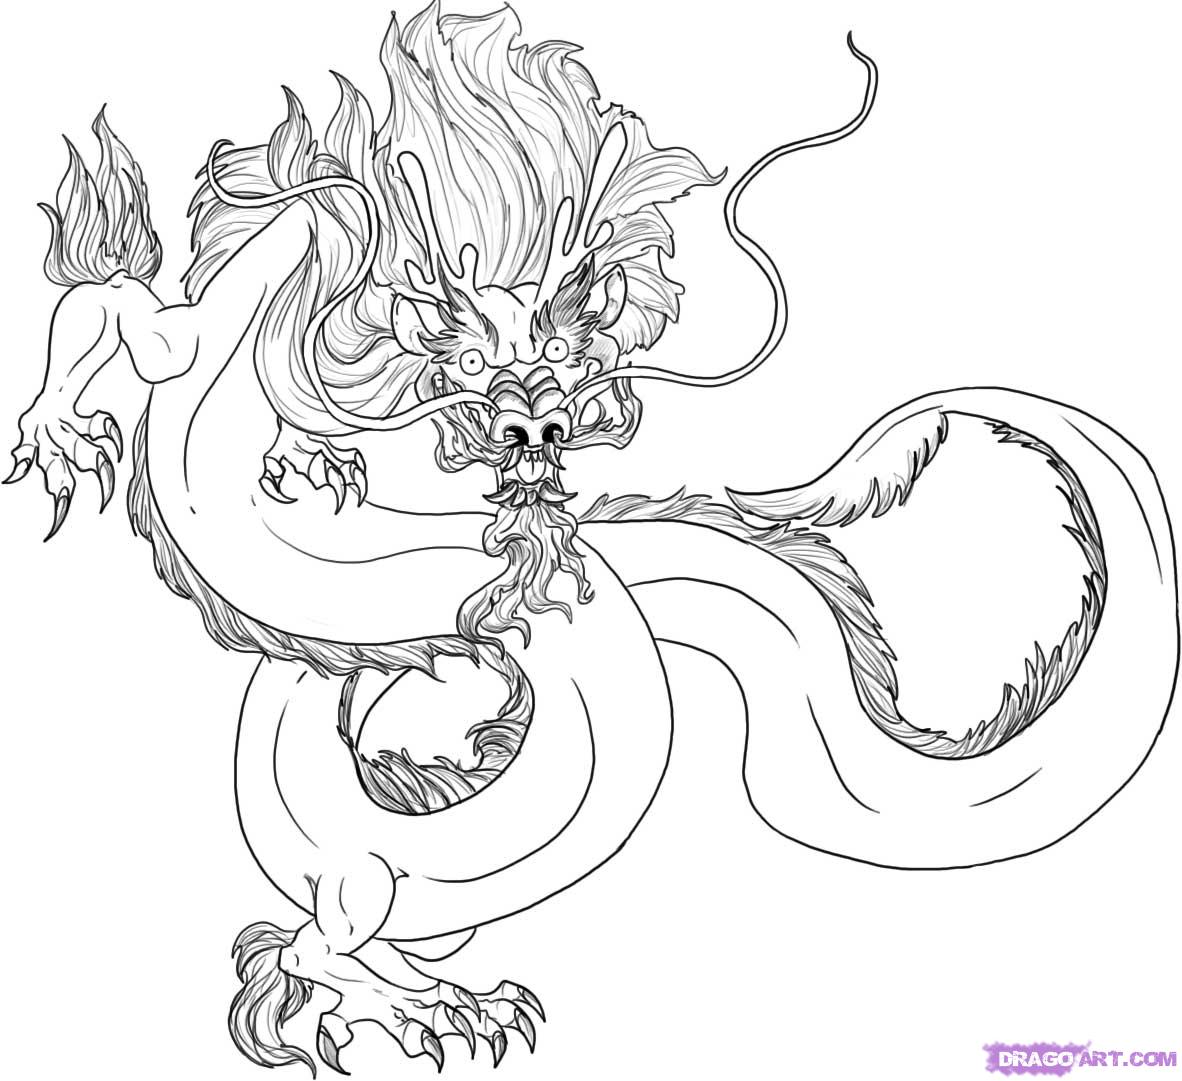 How to Draw a Traditional Chinese Dragon, Step by Step, Dragons ...